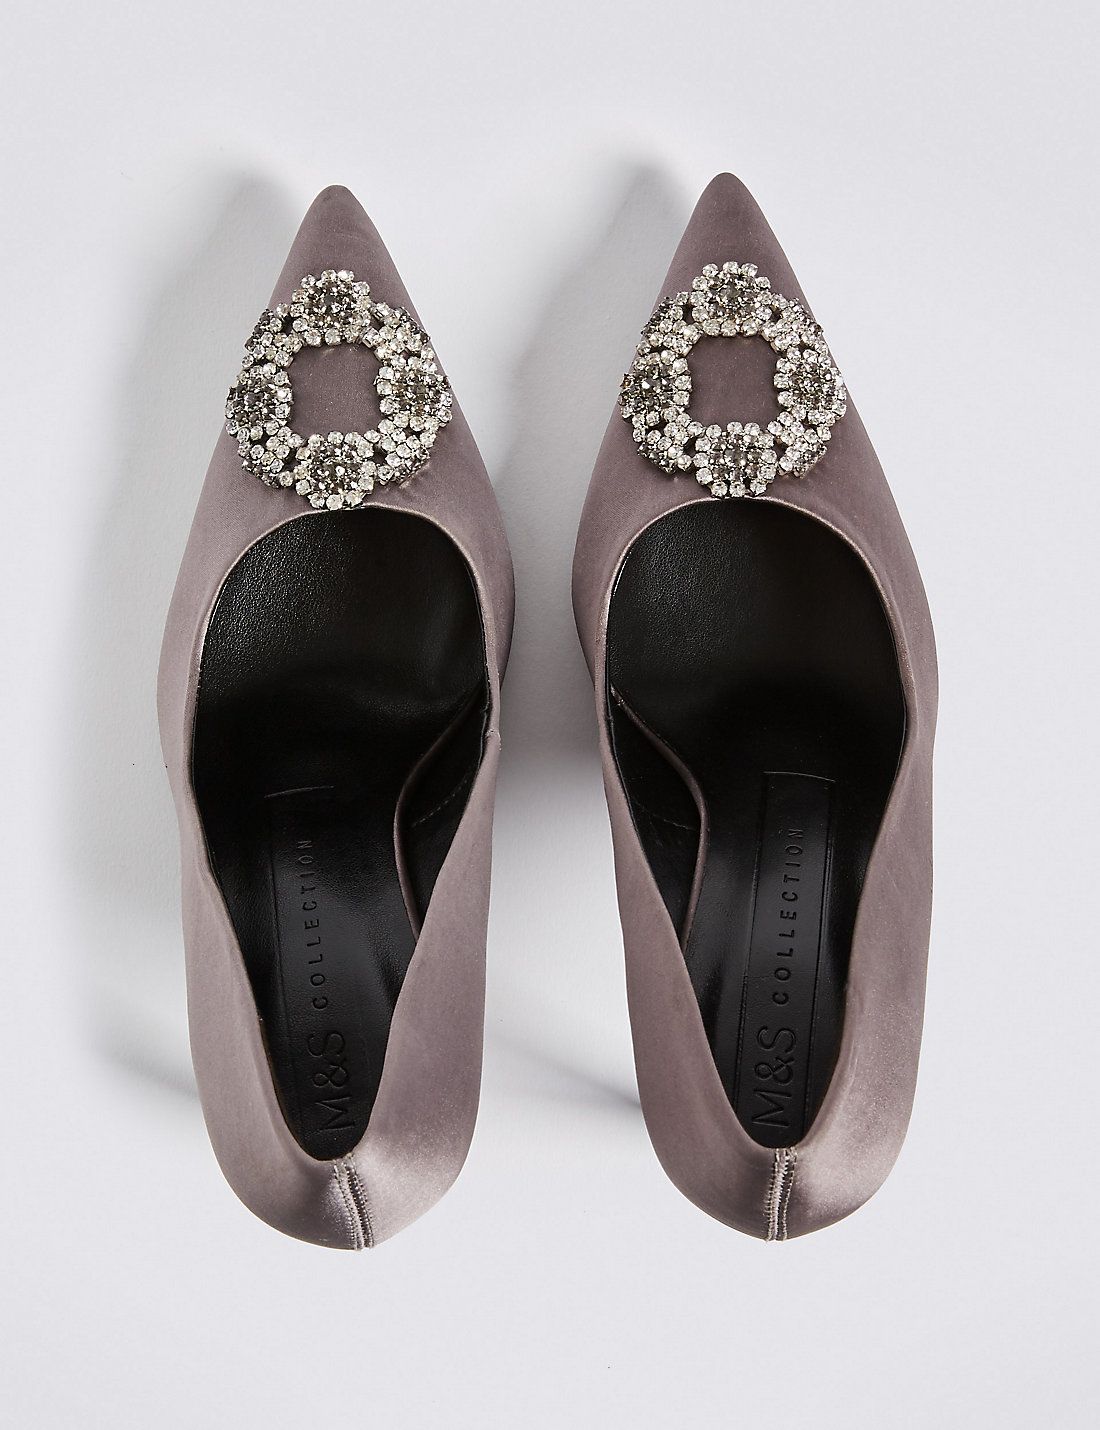 its Manolo Blahnik-inspired shoes